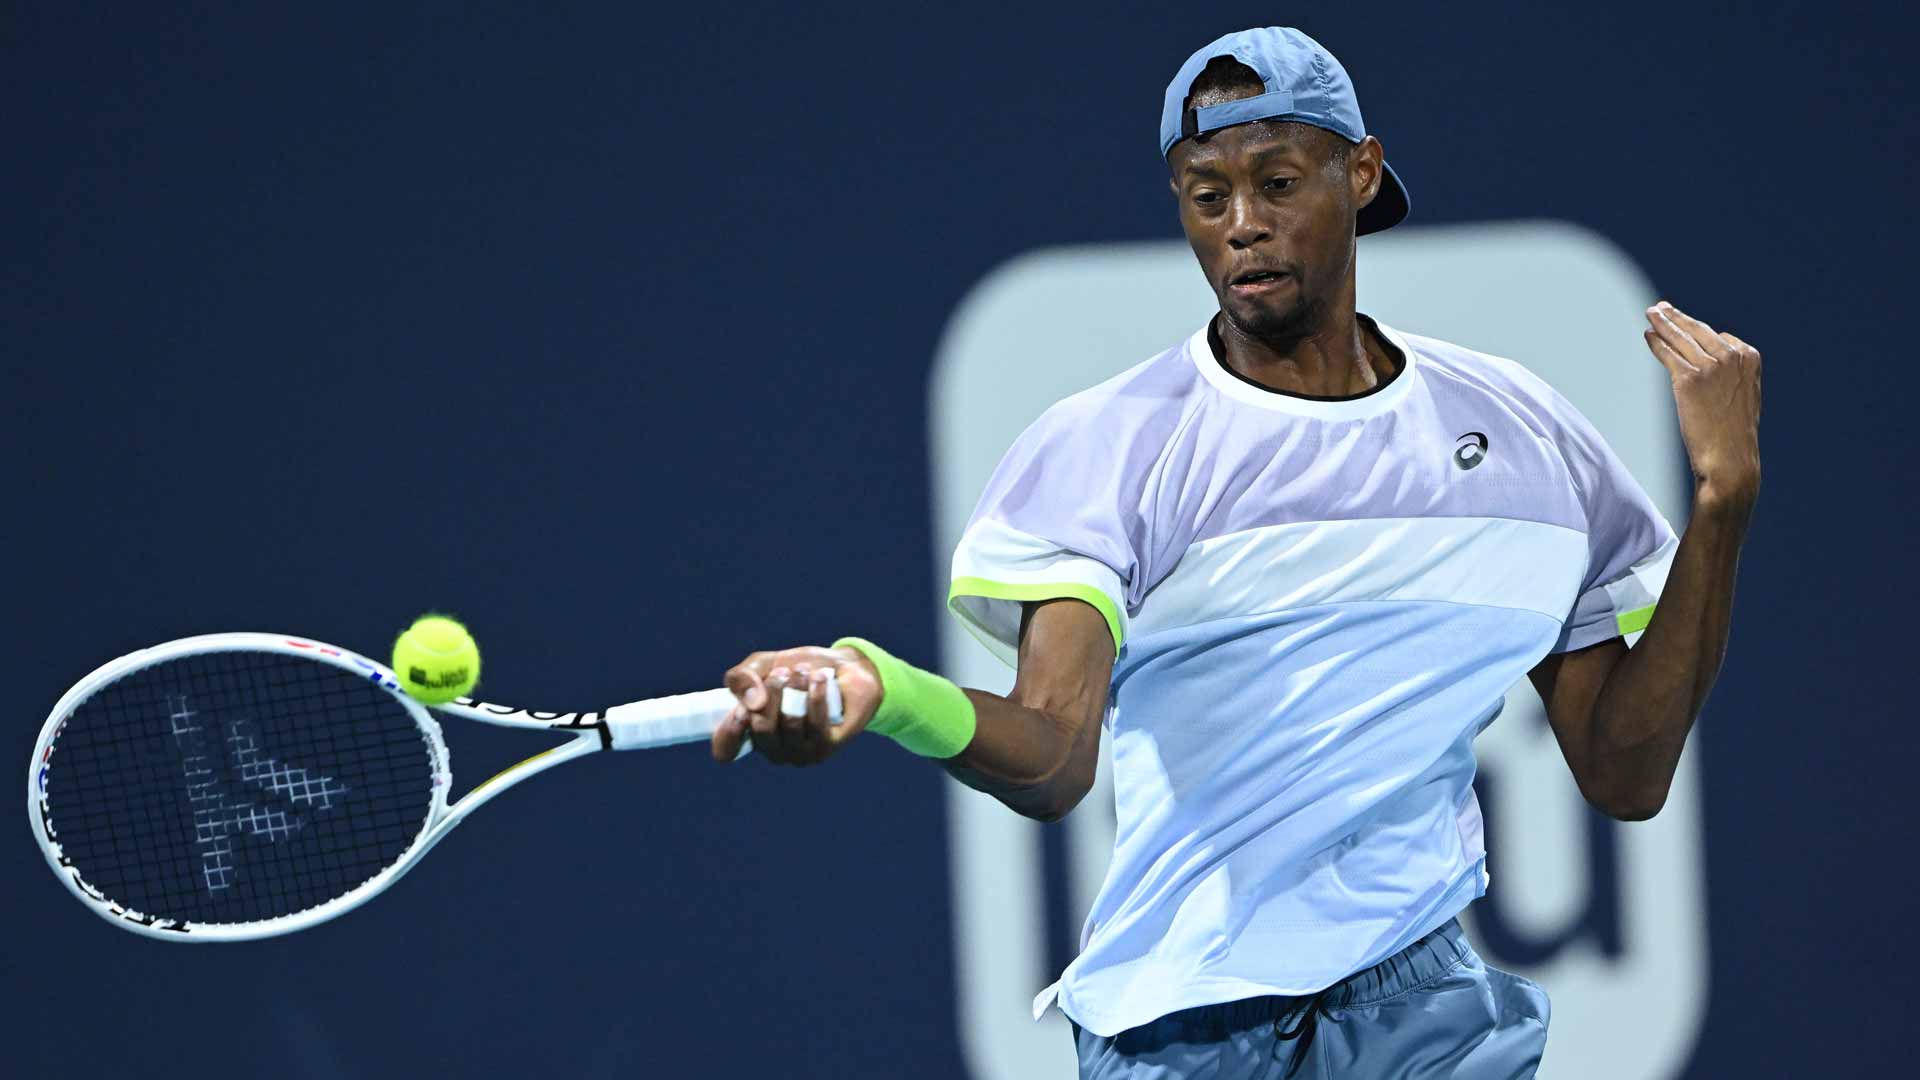 Christopher Eubanks Dream Miami Run Continues This Feels Great ATP Tour Tennis